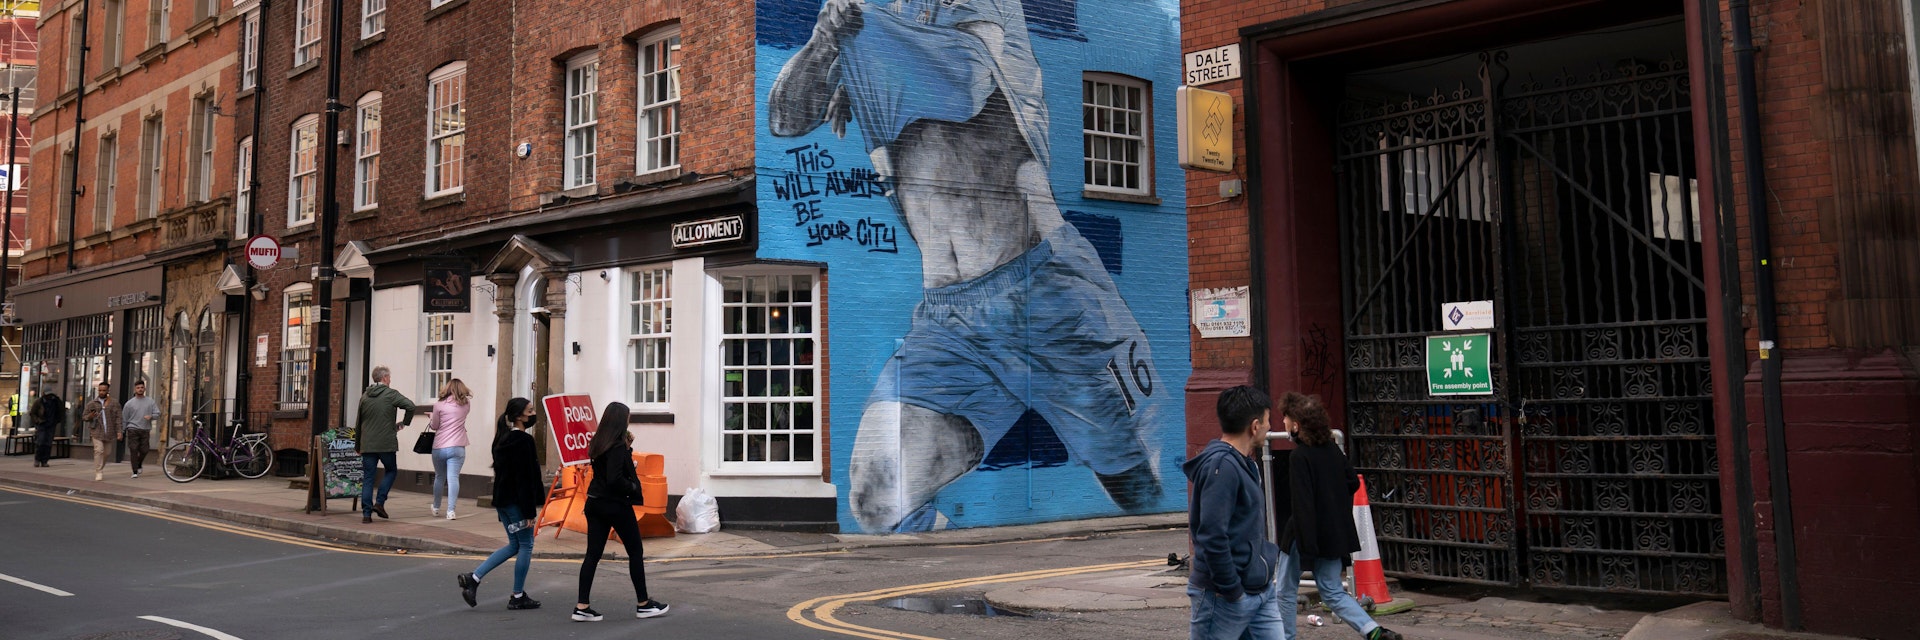 2FWG7WN Manchester, UK, 22rd May 2021. A new mural of Manchester City footballer Sergio Aguero is seen in Manchesters Northern Quarter the day before the team are presented with the English Premier League trophy, Manchester, UK. Aguero has agreed to sign for Barcelona on a two-year contract when his Manchester City deal expires next month. Credit: Jon Super/Alamy Live News.